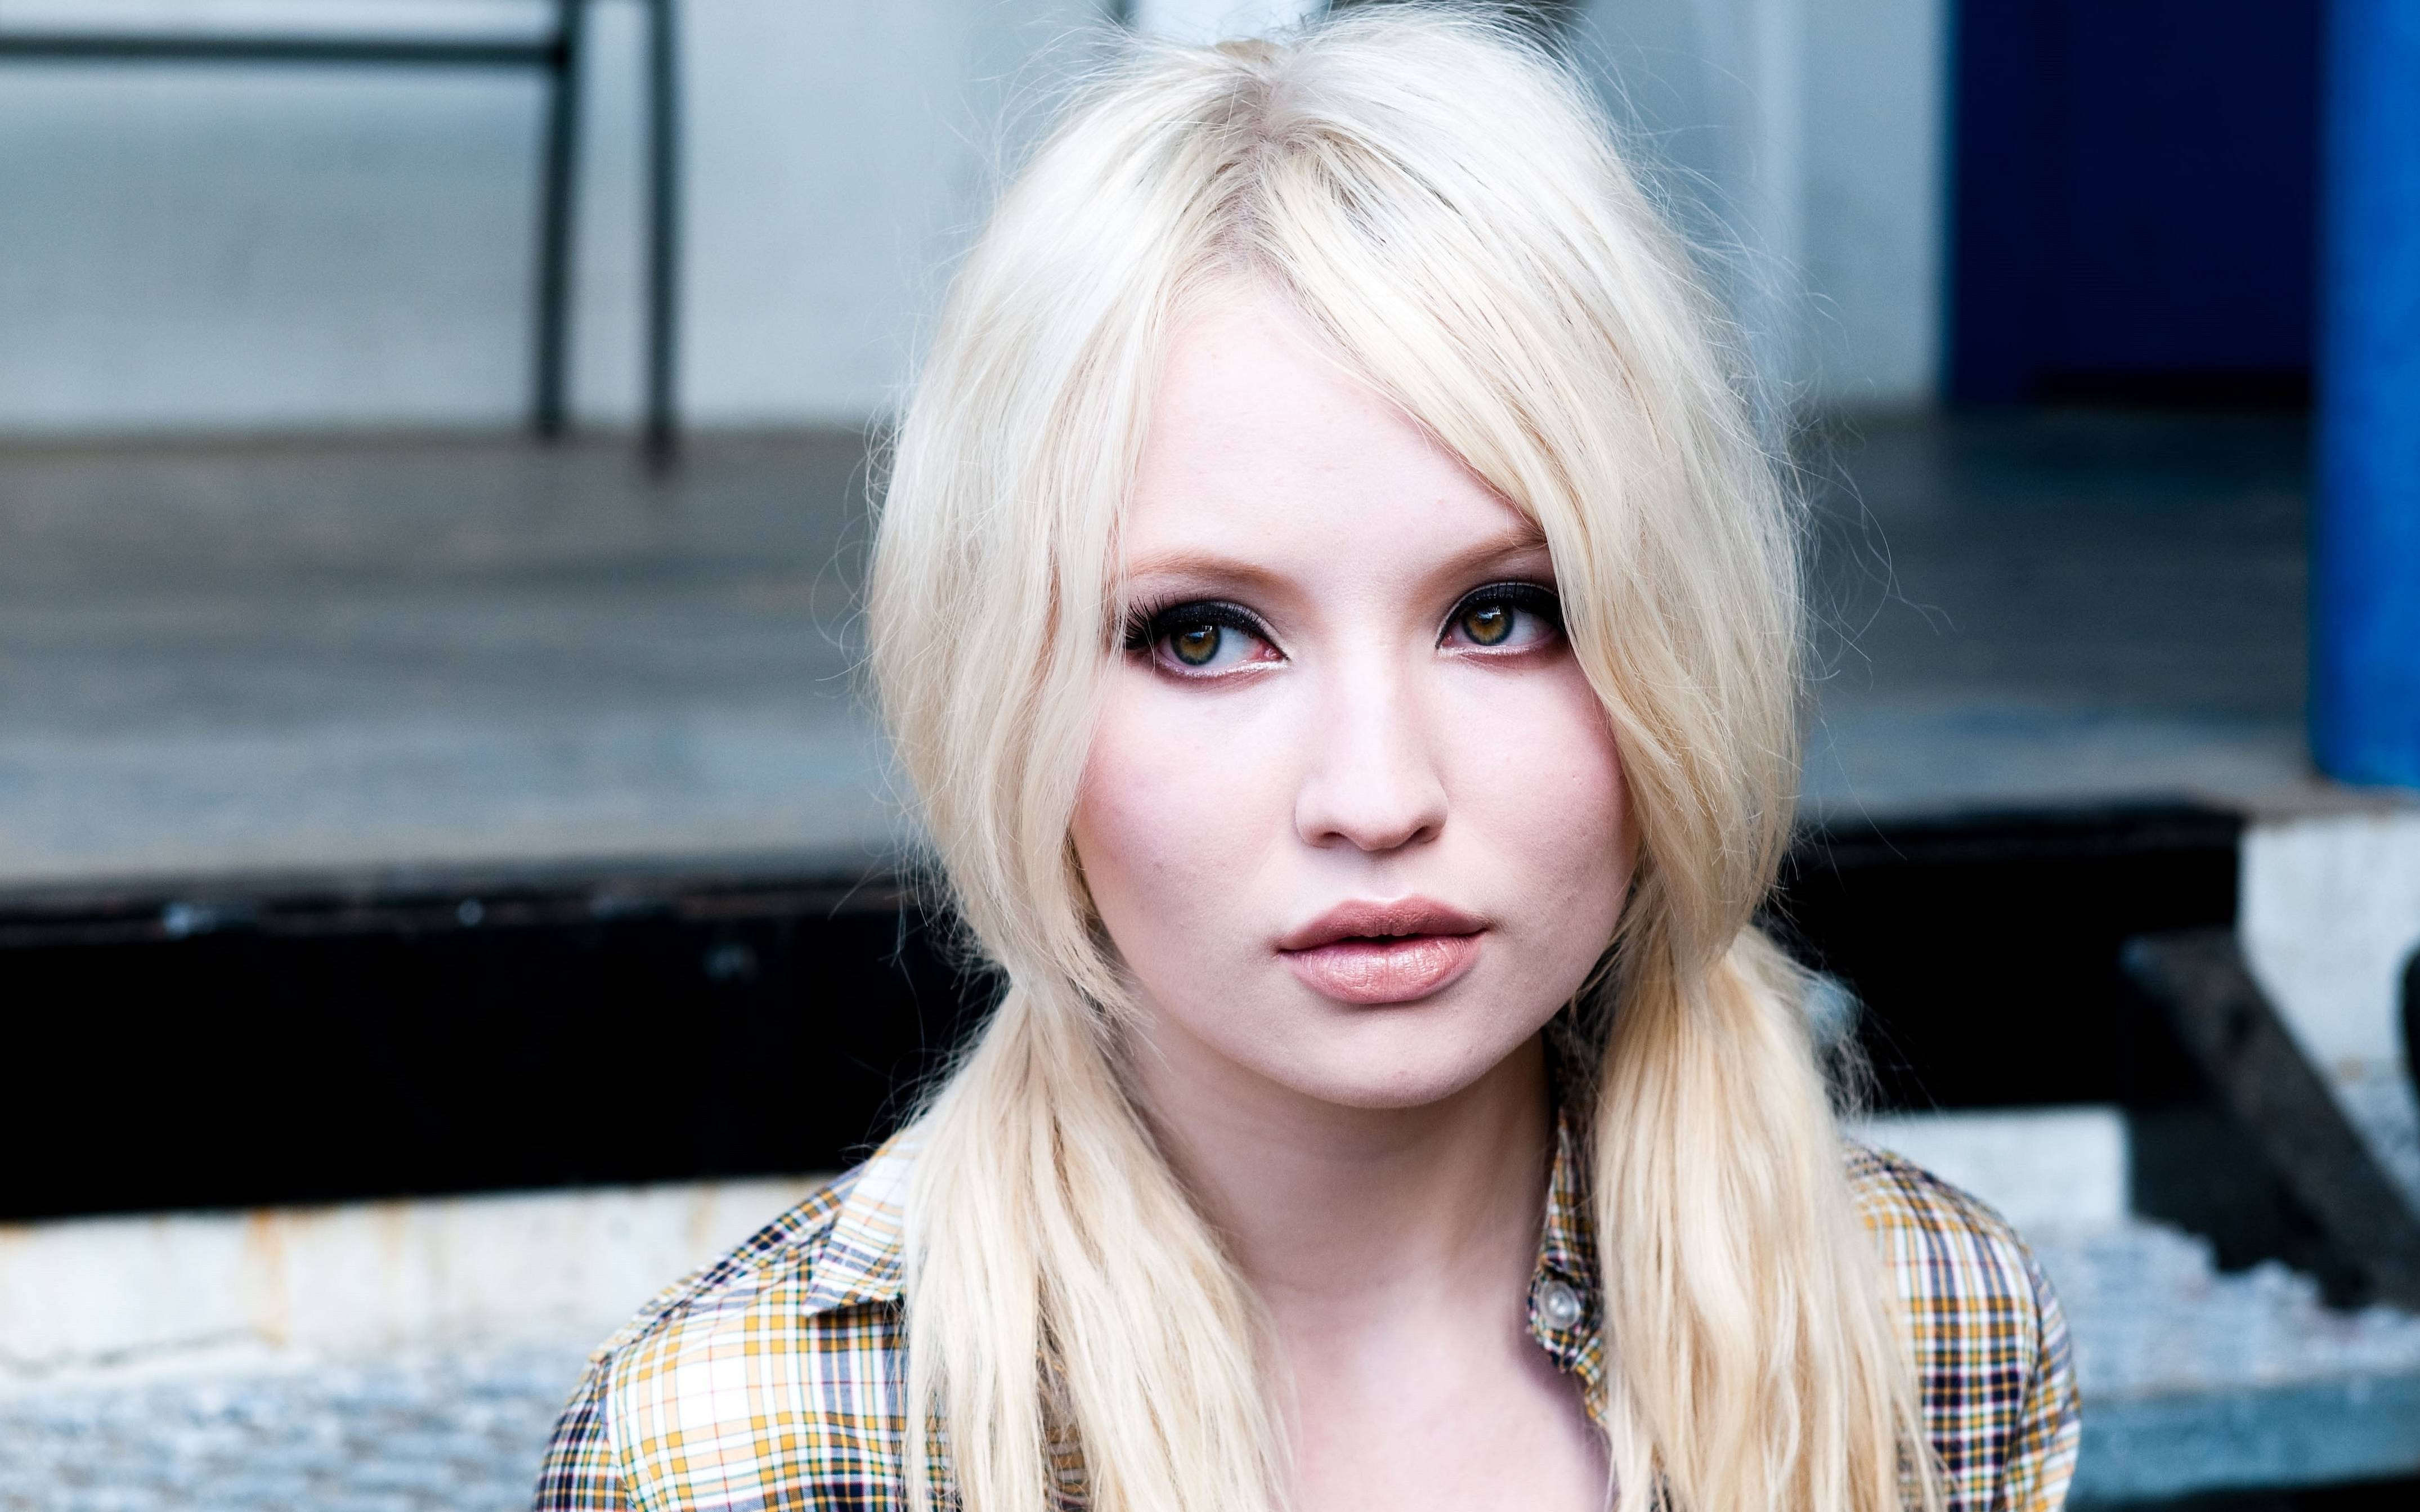 People 4300x2687 Emily Browning Sucker Punch women face blonde lips celebrity actress